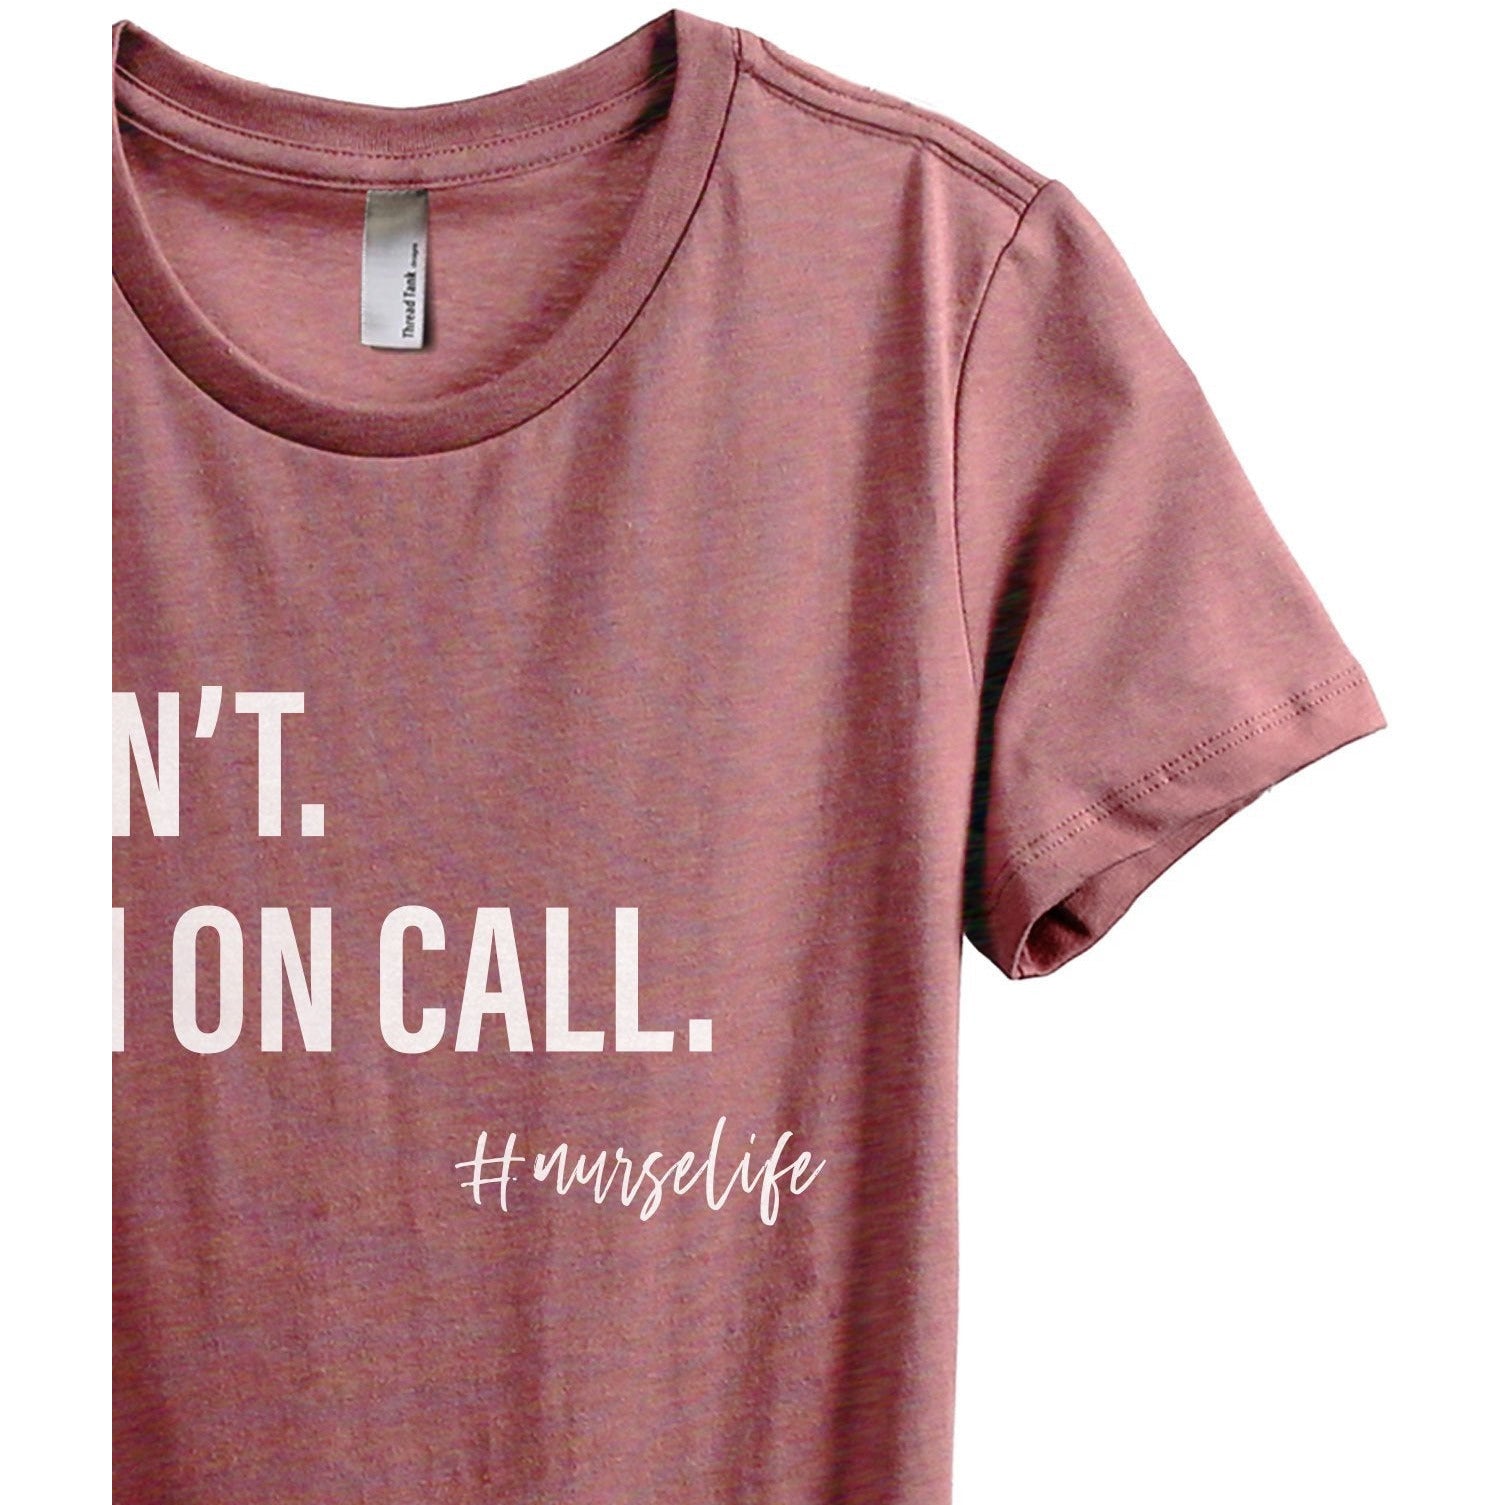 Can't I'm On Call Nurse Life Women's Relaxed Crewneck T-Shirt Top Tee Heather Rouge Zoom Details
